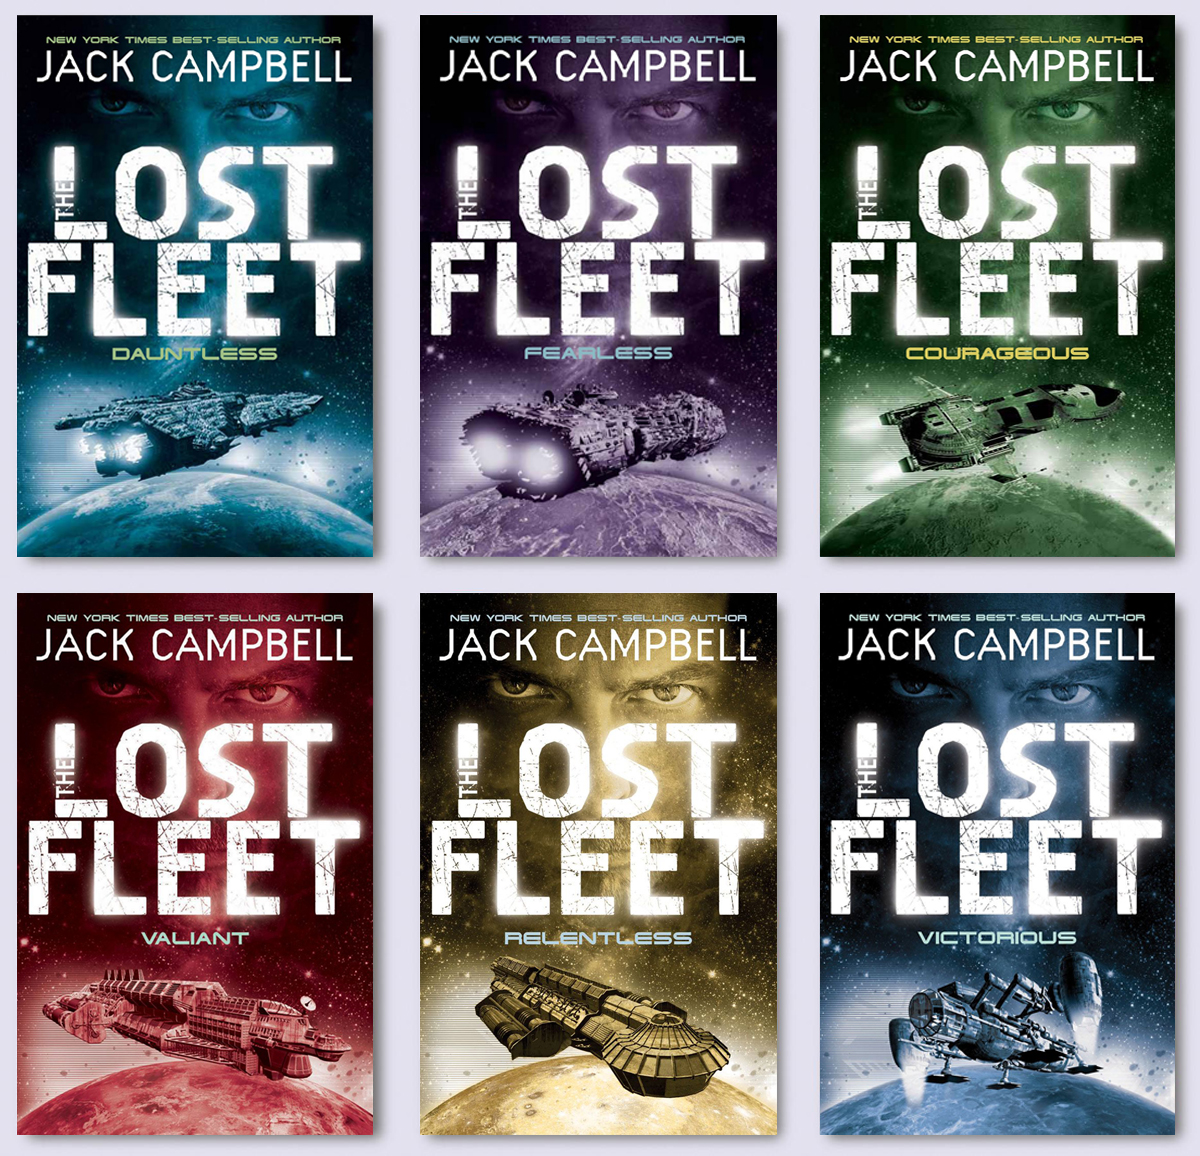 the lost fleet dauntless by jack campbell